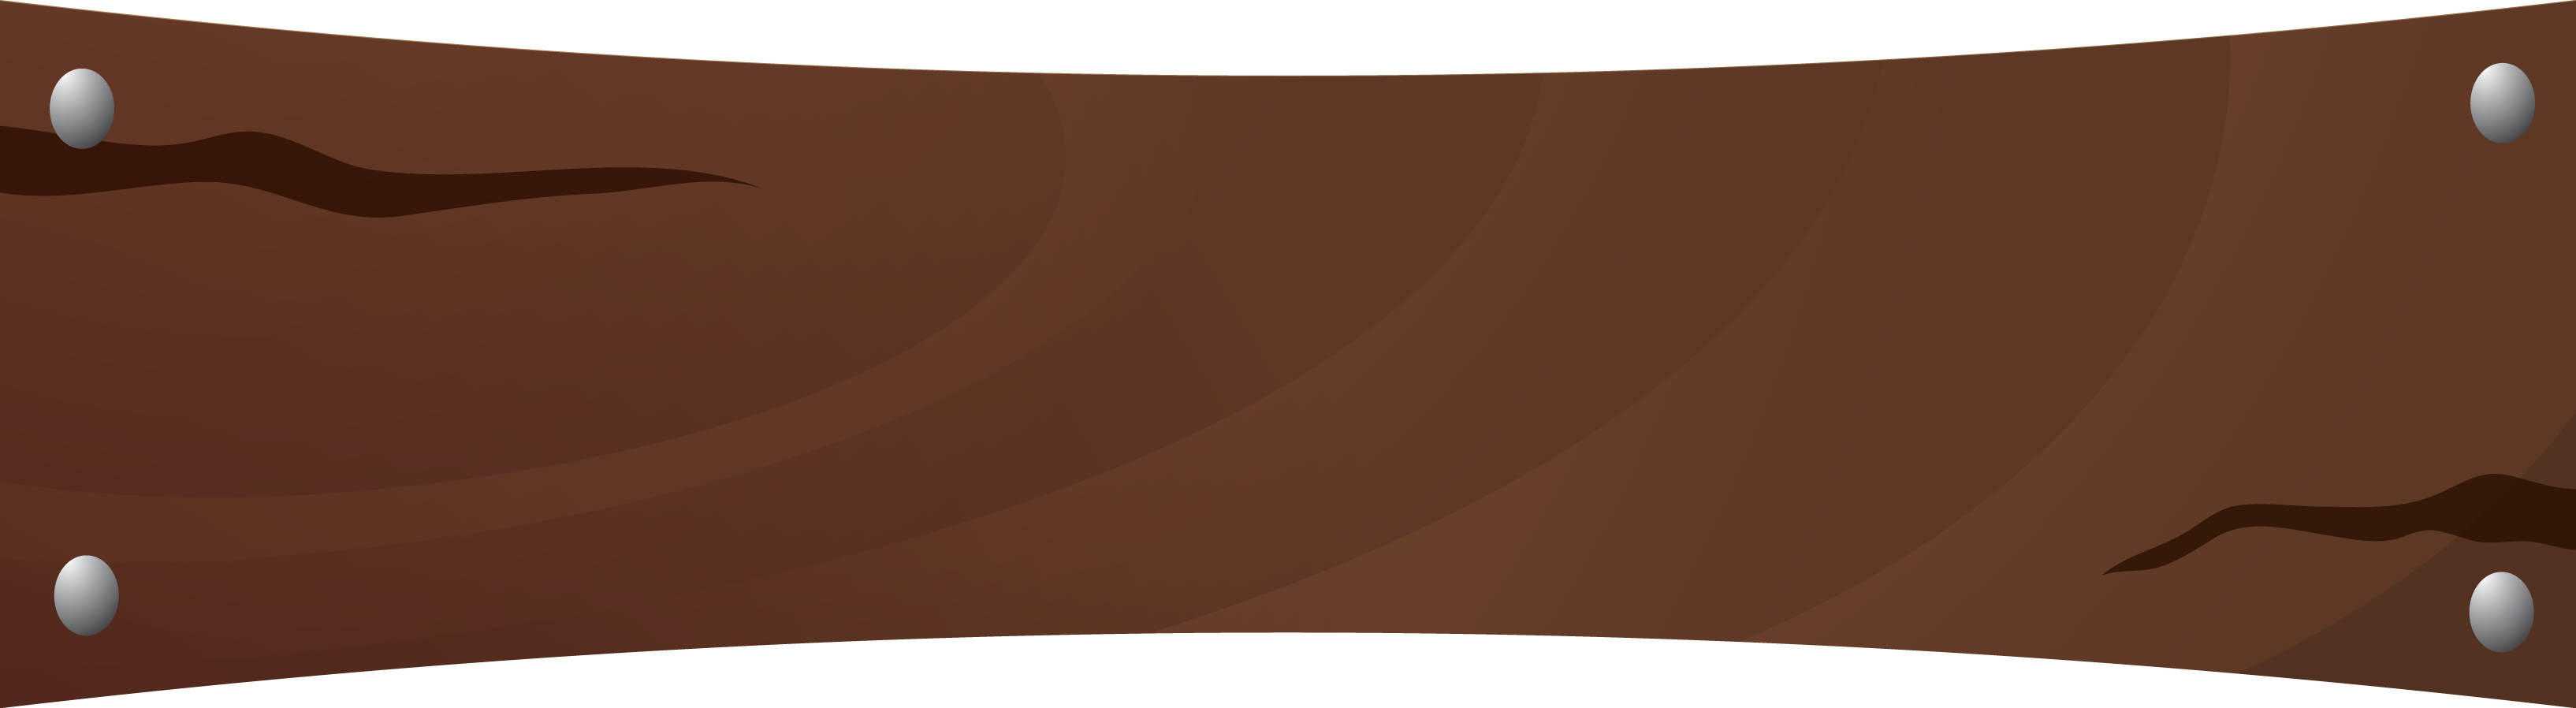 Brown Banner PNG Background Image